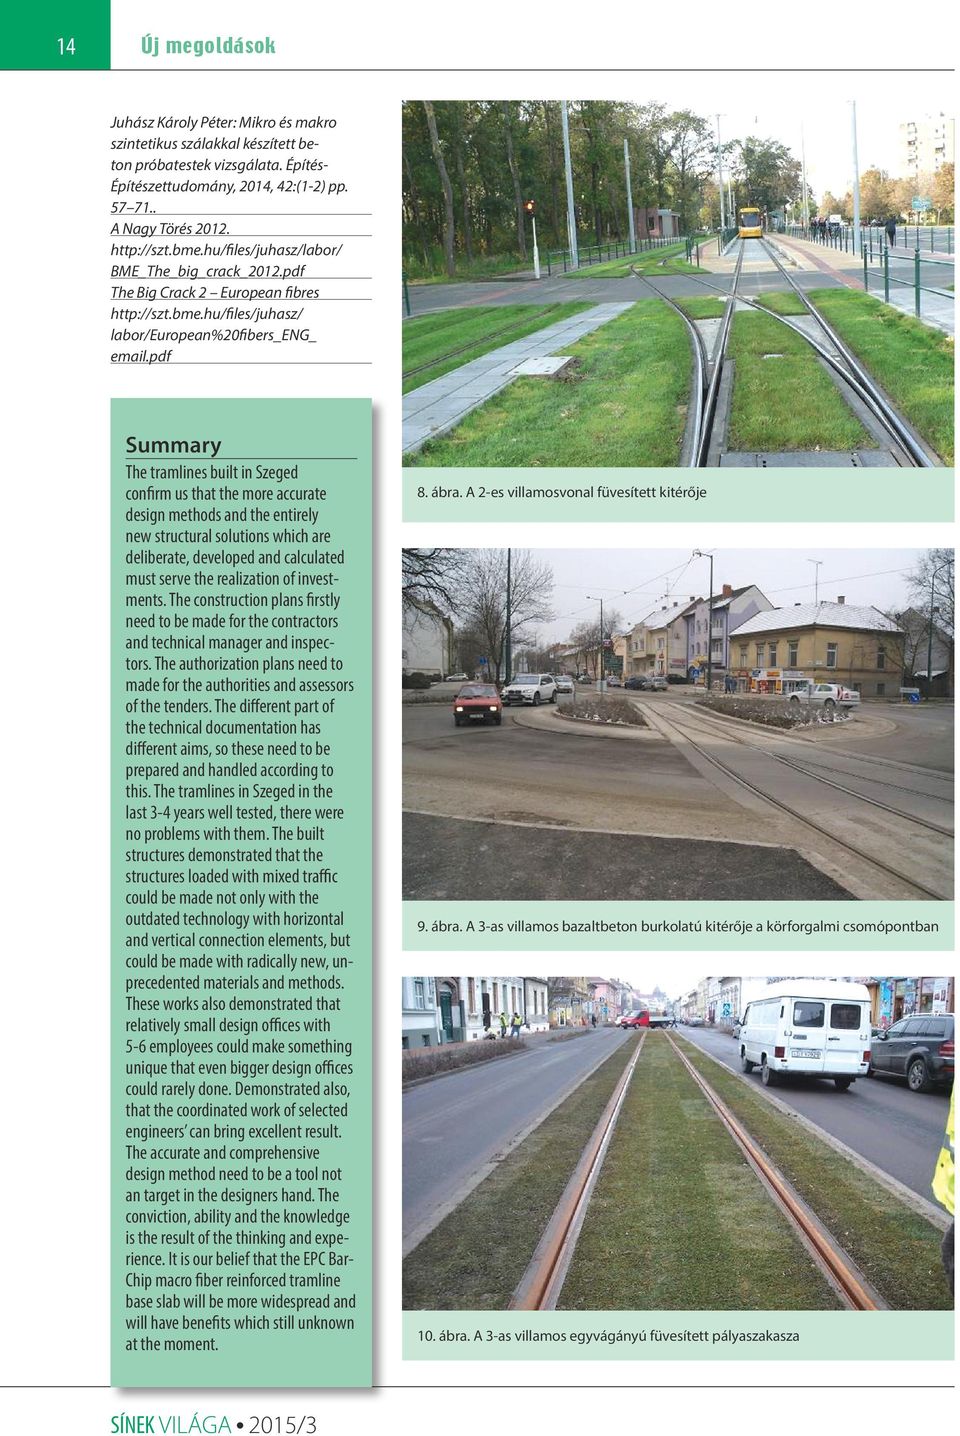 pdf Summary The tramlines built in Szeged confirm us that the more accurate design methods and the entirely new structural solutions which are deliberate, developed and calculated must serve the